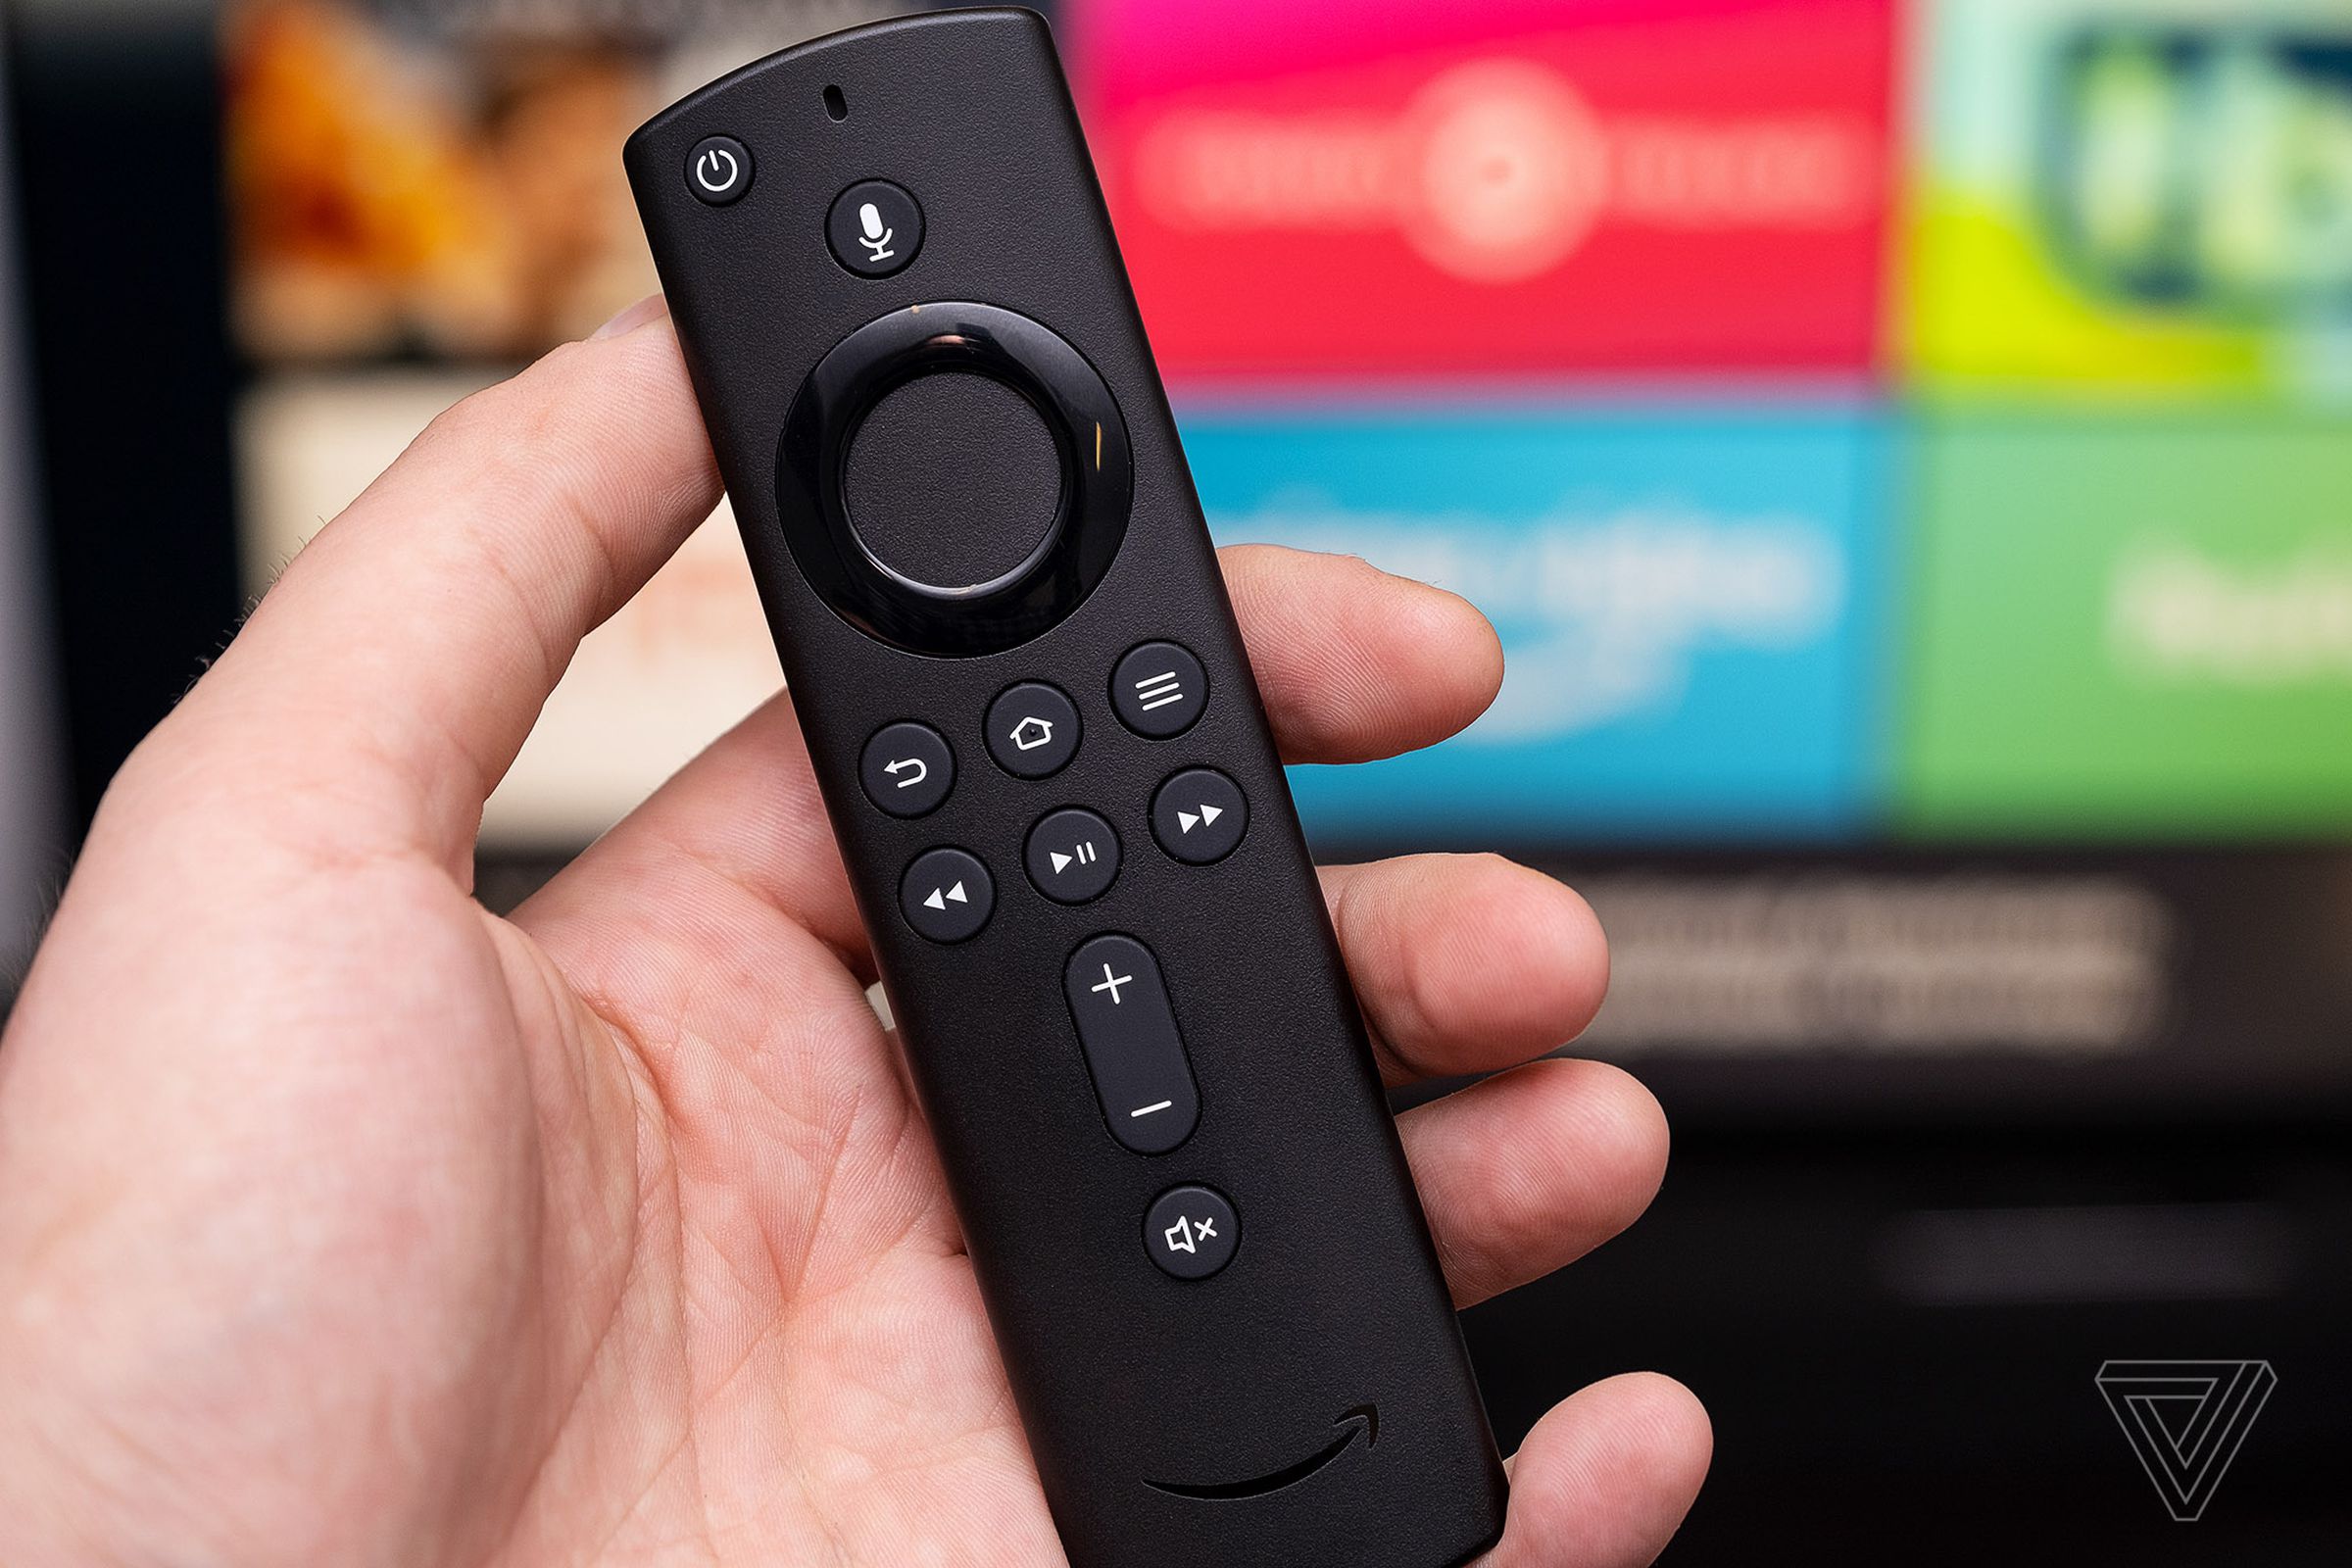 The new Alexa voice remote adds power, volume, and mute buttons. It can also change HDMI inputs or tune to a specific channel on some cable boxes. 